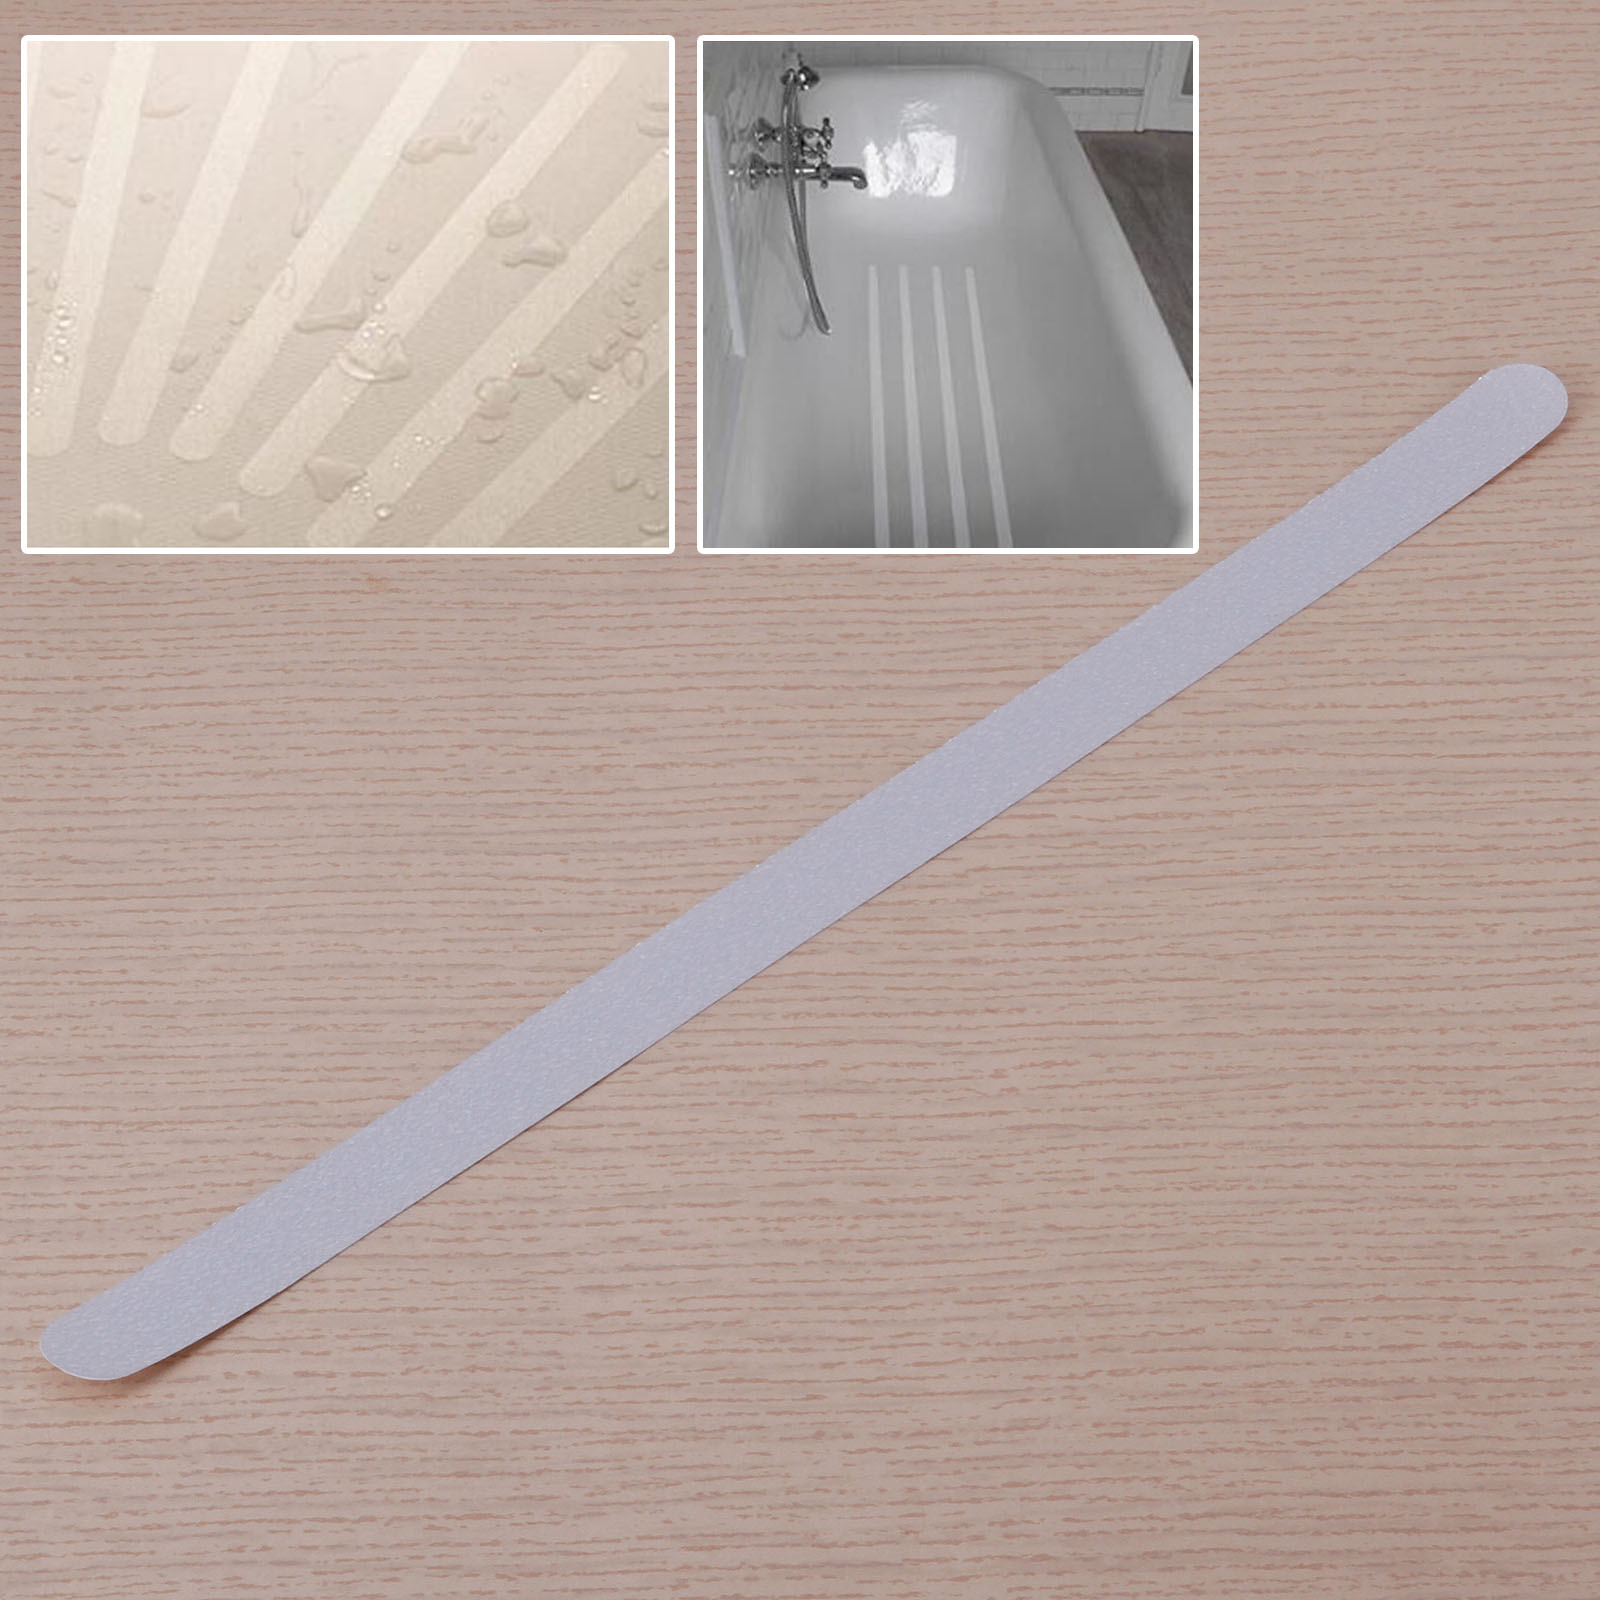 surepromise Anti Slip Strips Stickers Bath Shower Stair Safety Non Slip Pads Clear Black